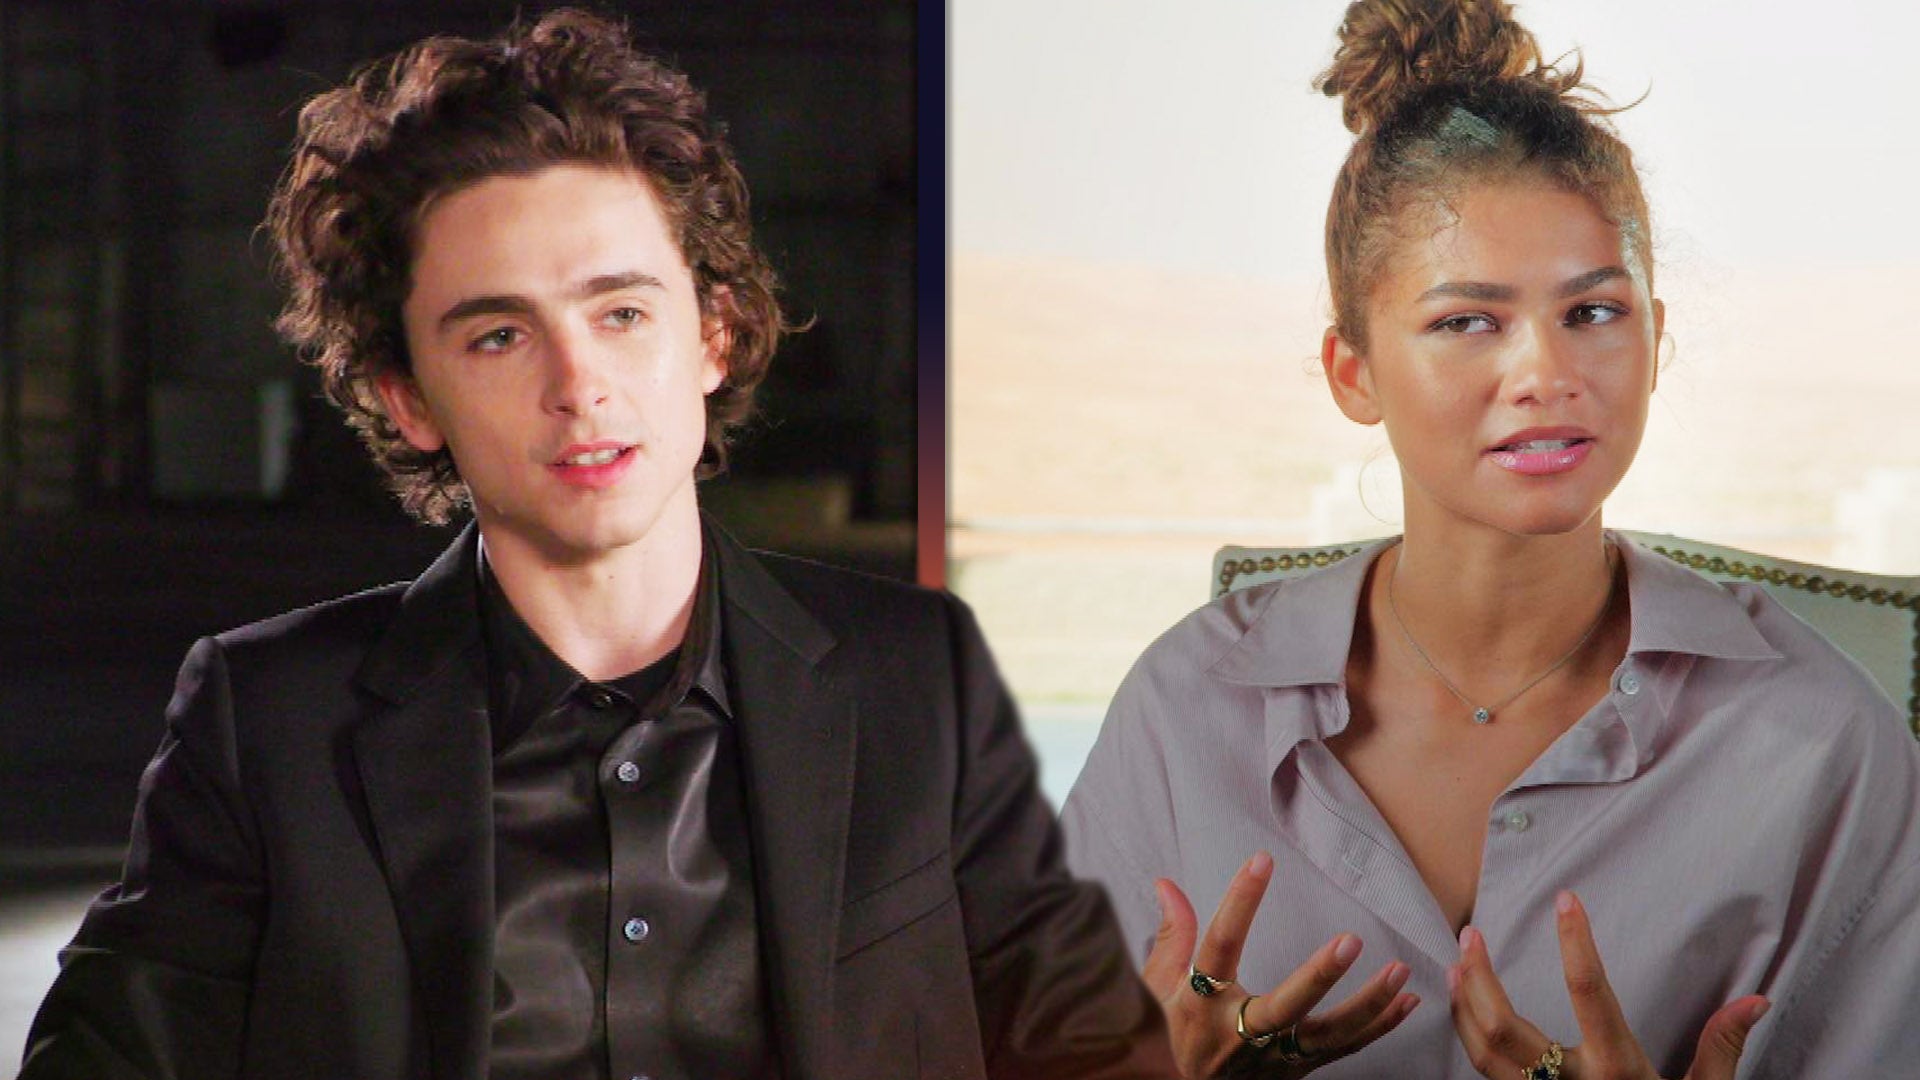 ‘Dune: Part Two’: Zendaya and Timothée Chalamet Break Down Their Complicated Dynamic (Exclusive)